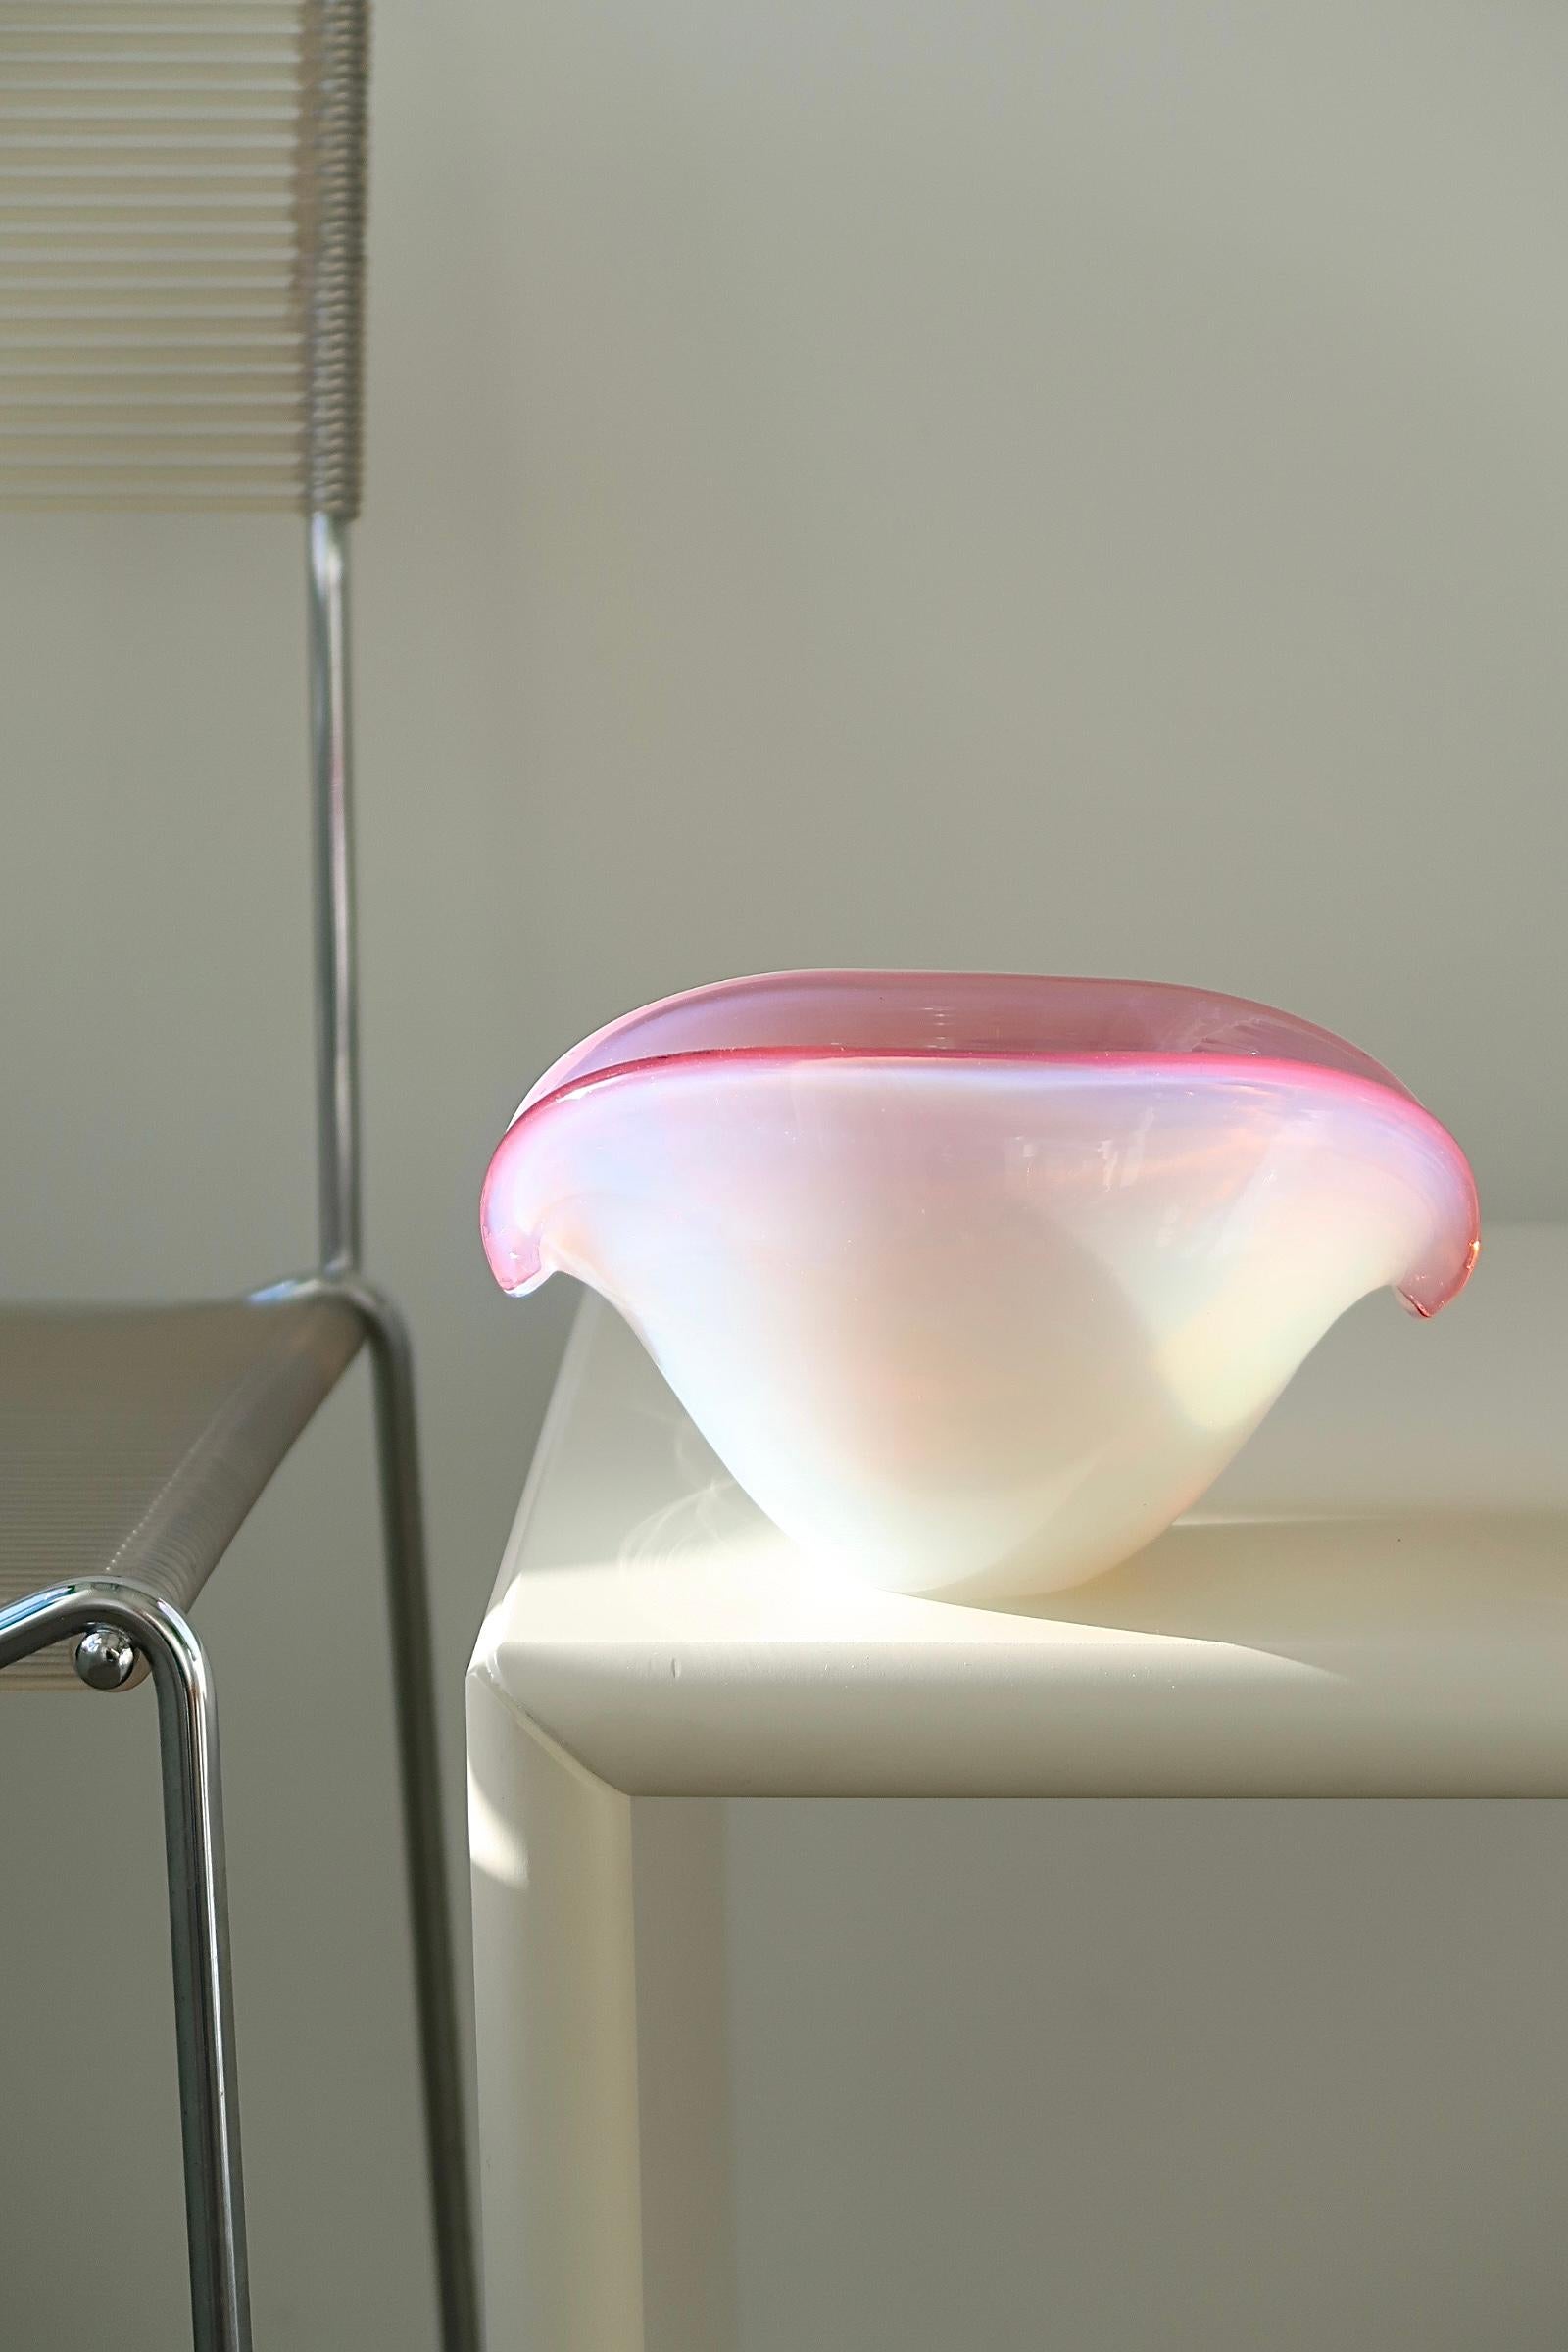 Vintage Murano clam bowl in pink and white shades. Mouth blown in opal glass in the shape of a clam. The bowl has two bases and can therefore both stand upright or rest on its side. Handmade in Italy, 1960/70s, and has hints of original Murano